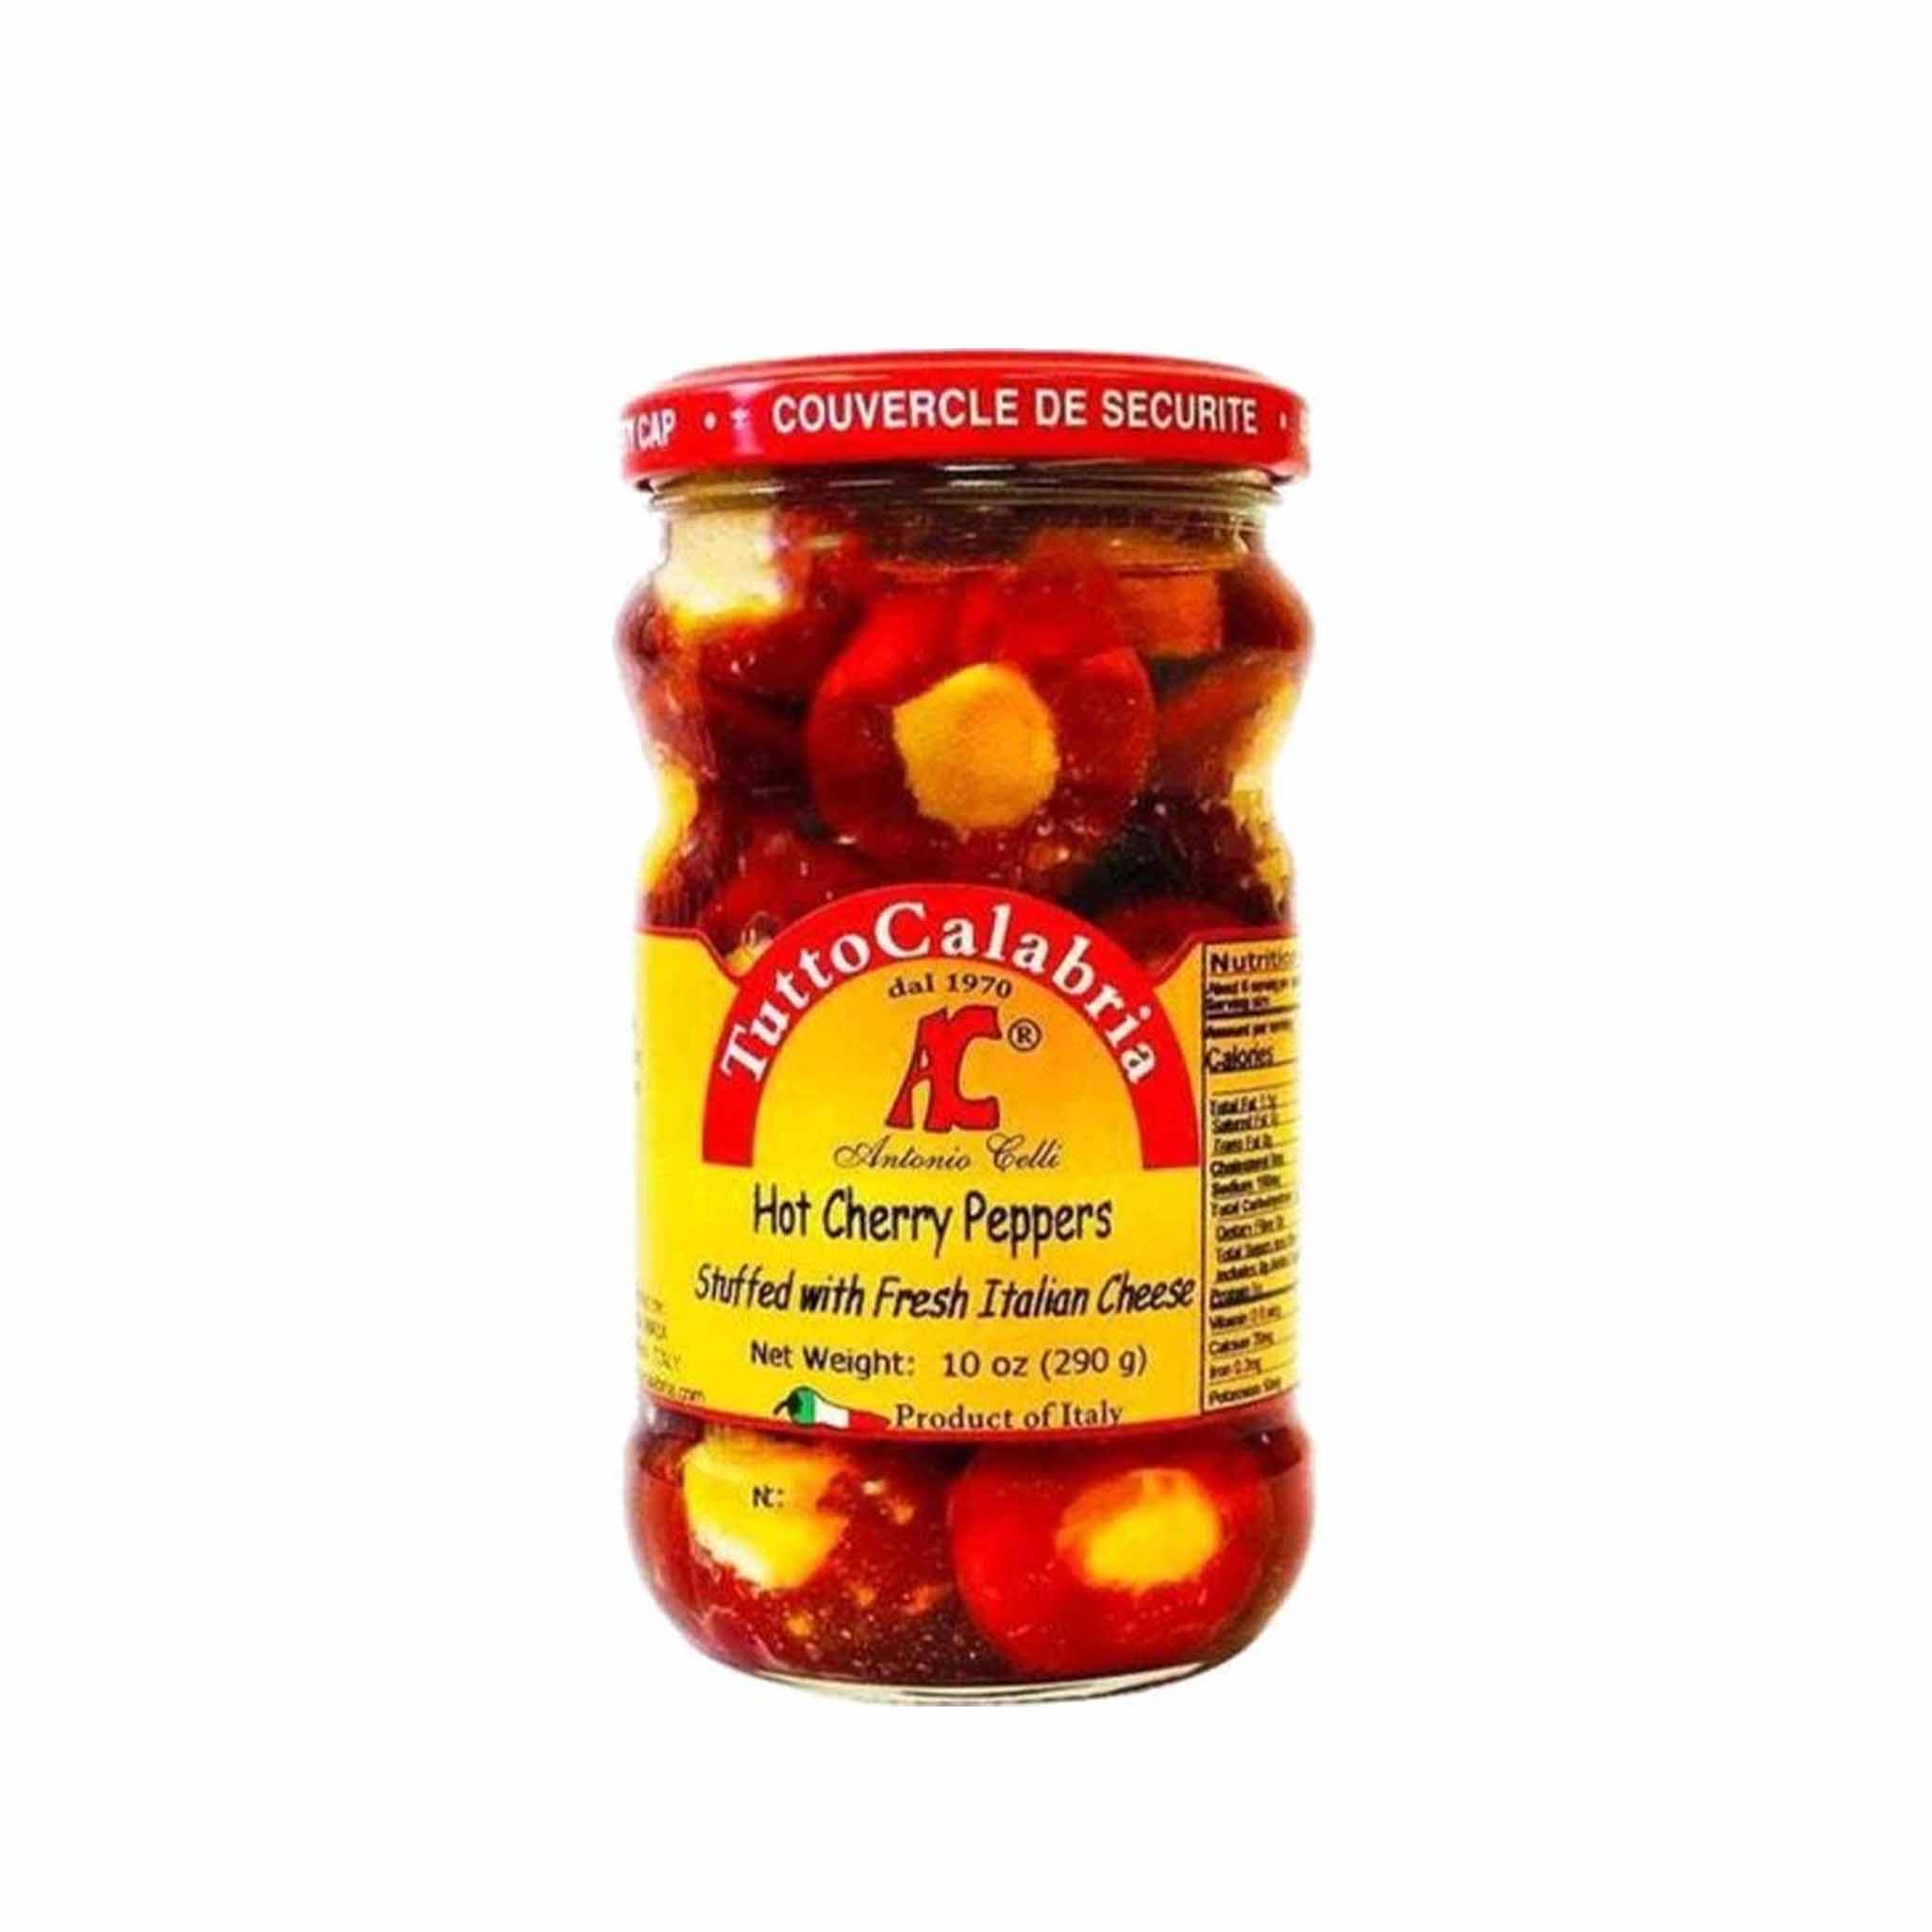 TUTTO CALABRIA HOT CHERRY PEPPERS 285g